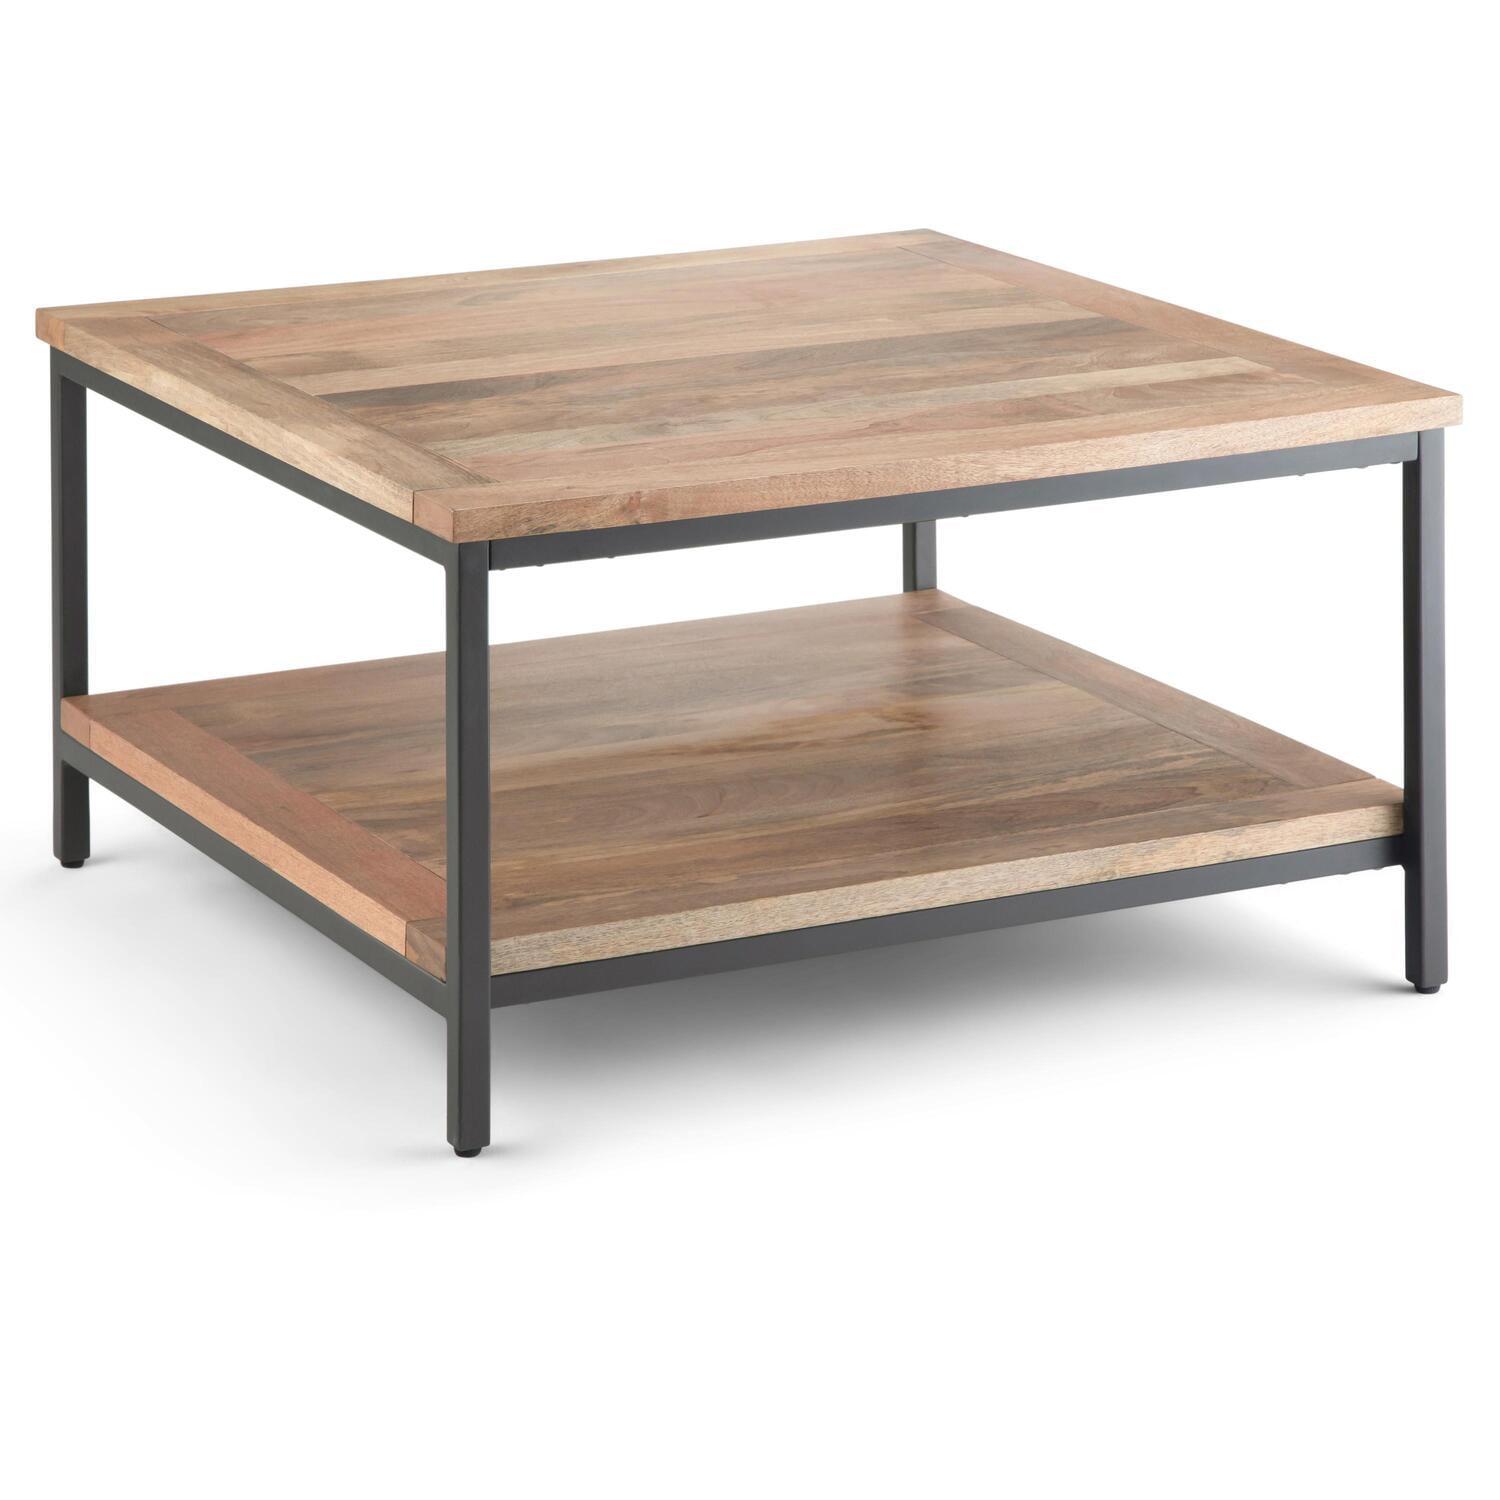 Skyler Solid Mango Wood 34" Square Coffee Table with Storage in Natural